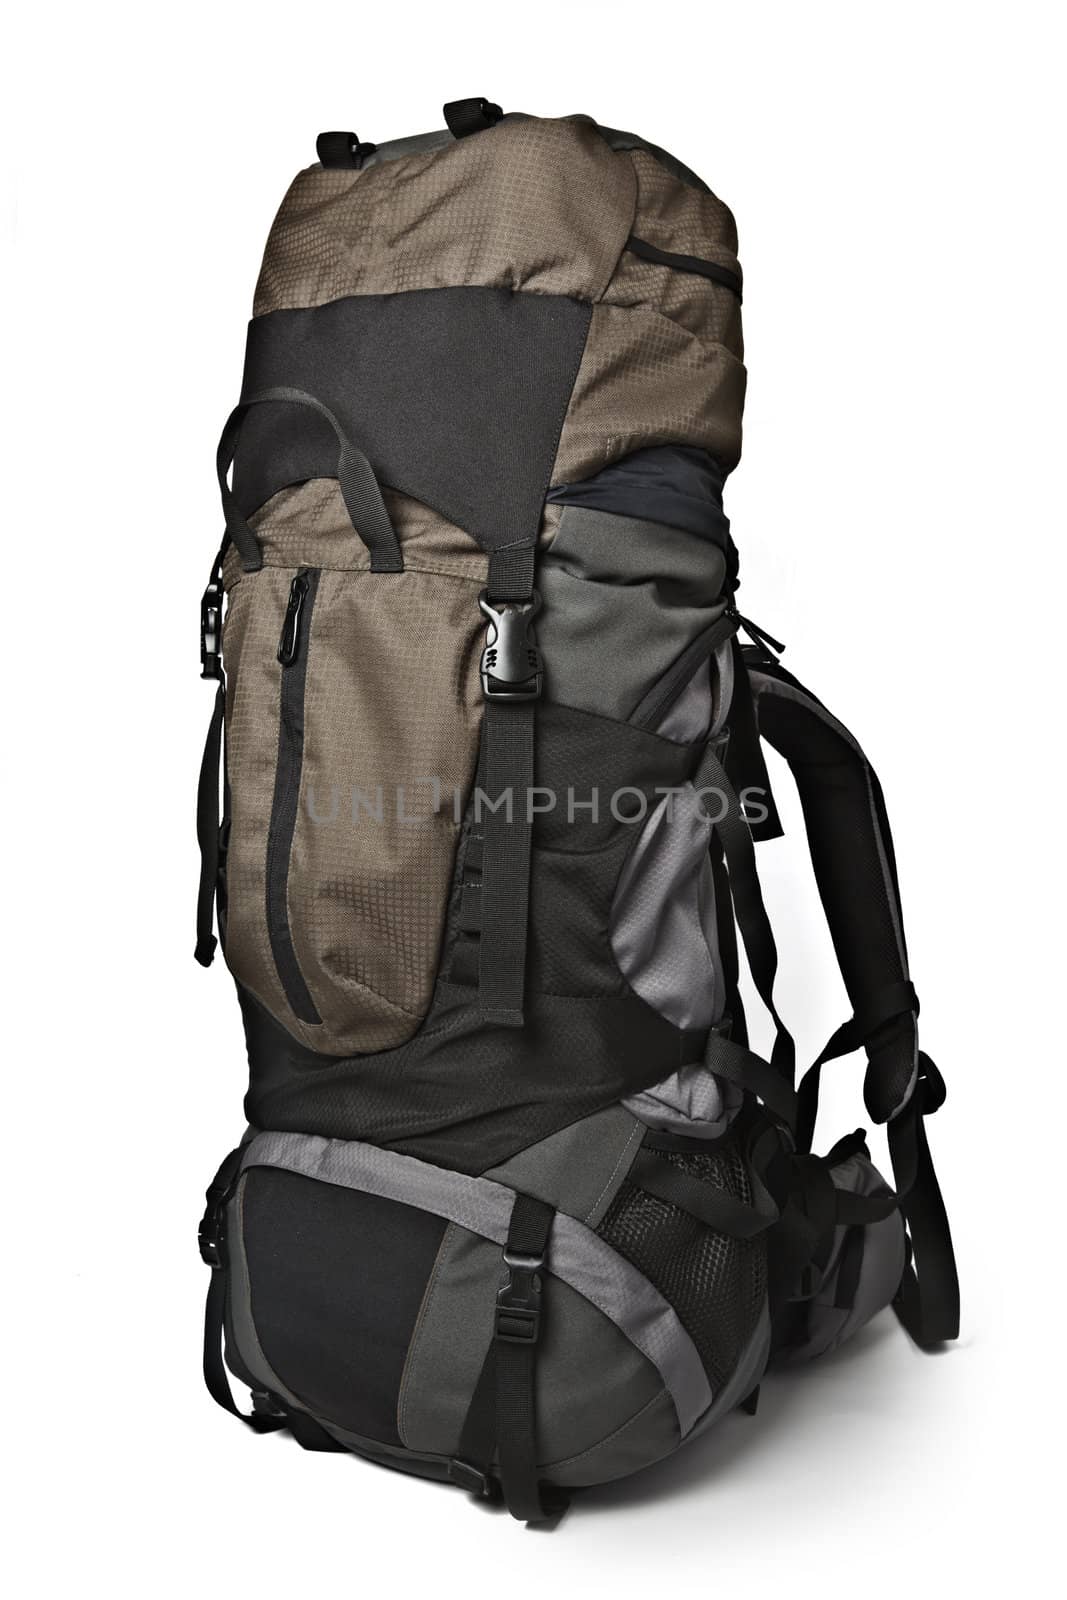 Trekking backpack isolated by dimol